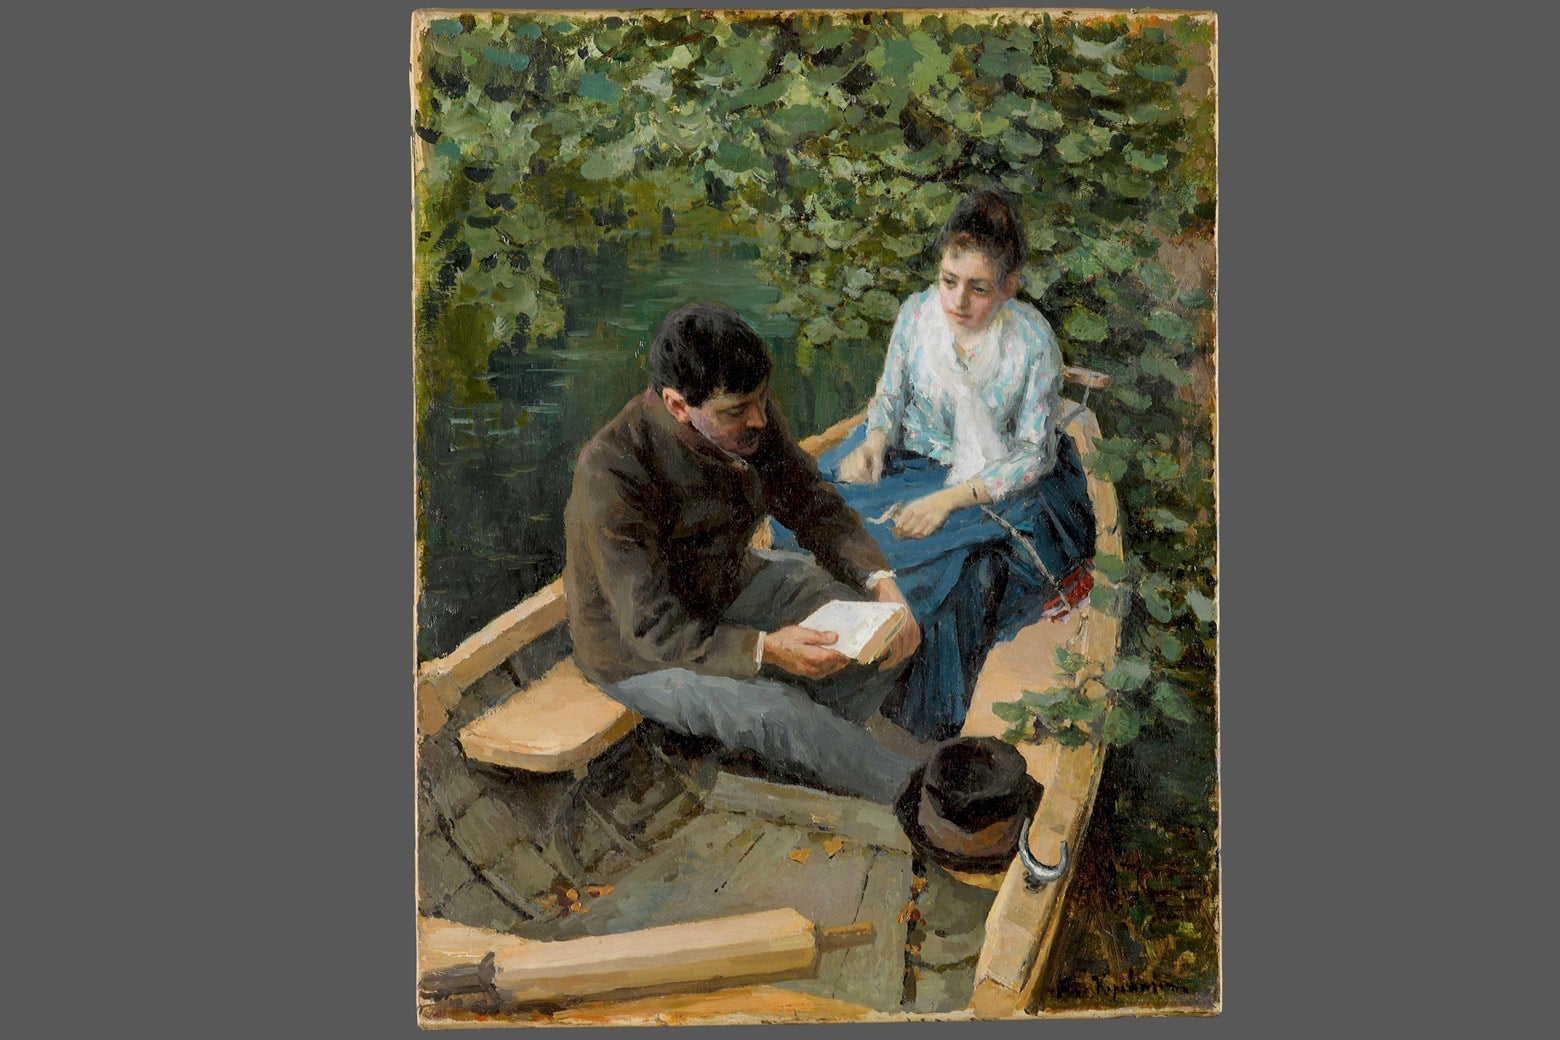 Impressionist painting of a man reading to a woman in a boat on water